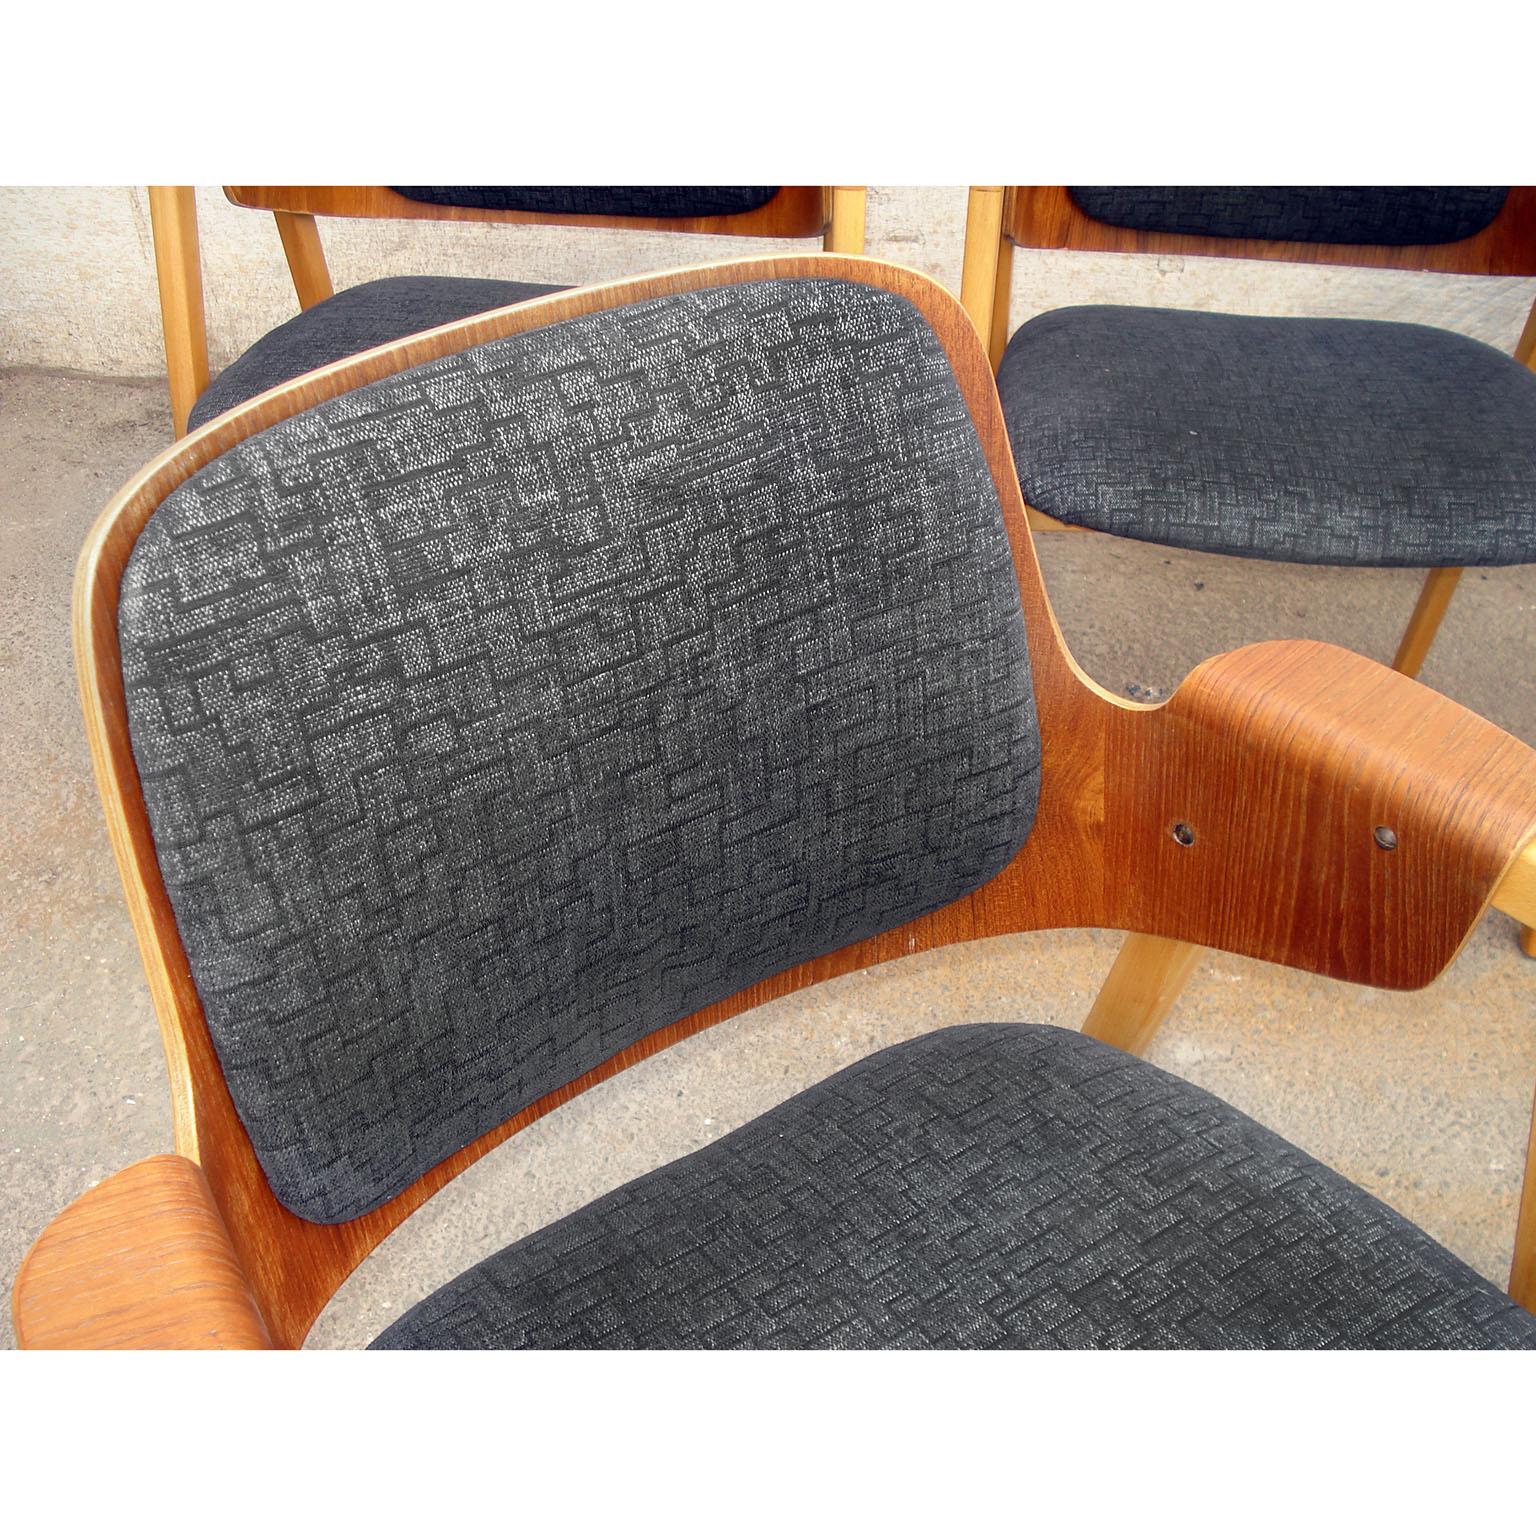 Set of 4 Elias Barup Teak Dining Chairs with Original Upholstery, 1950s Sweden For Sale 8